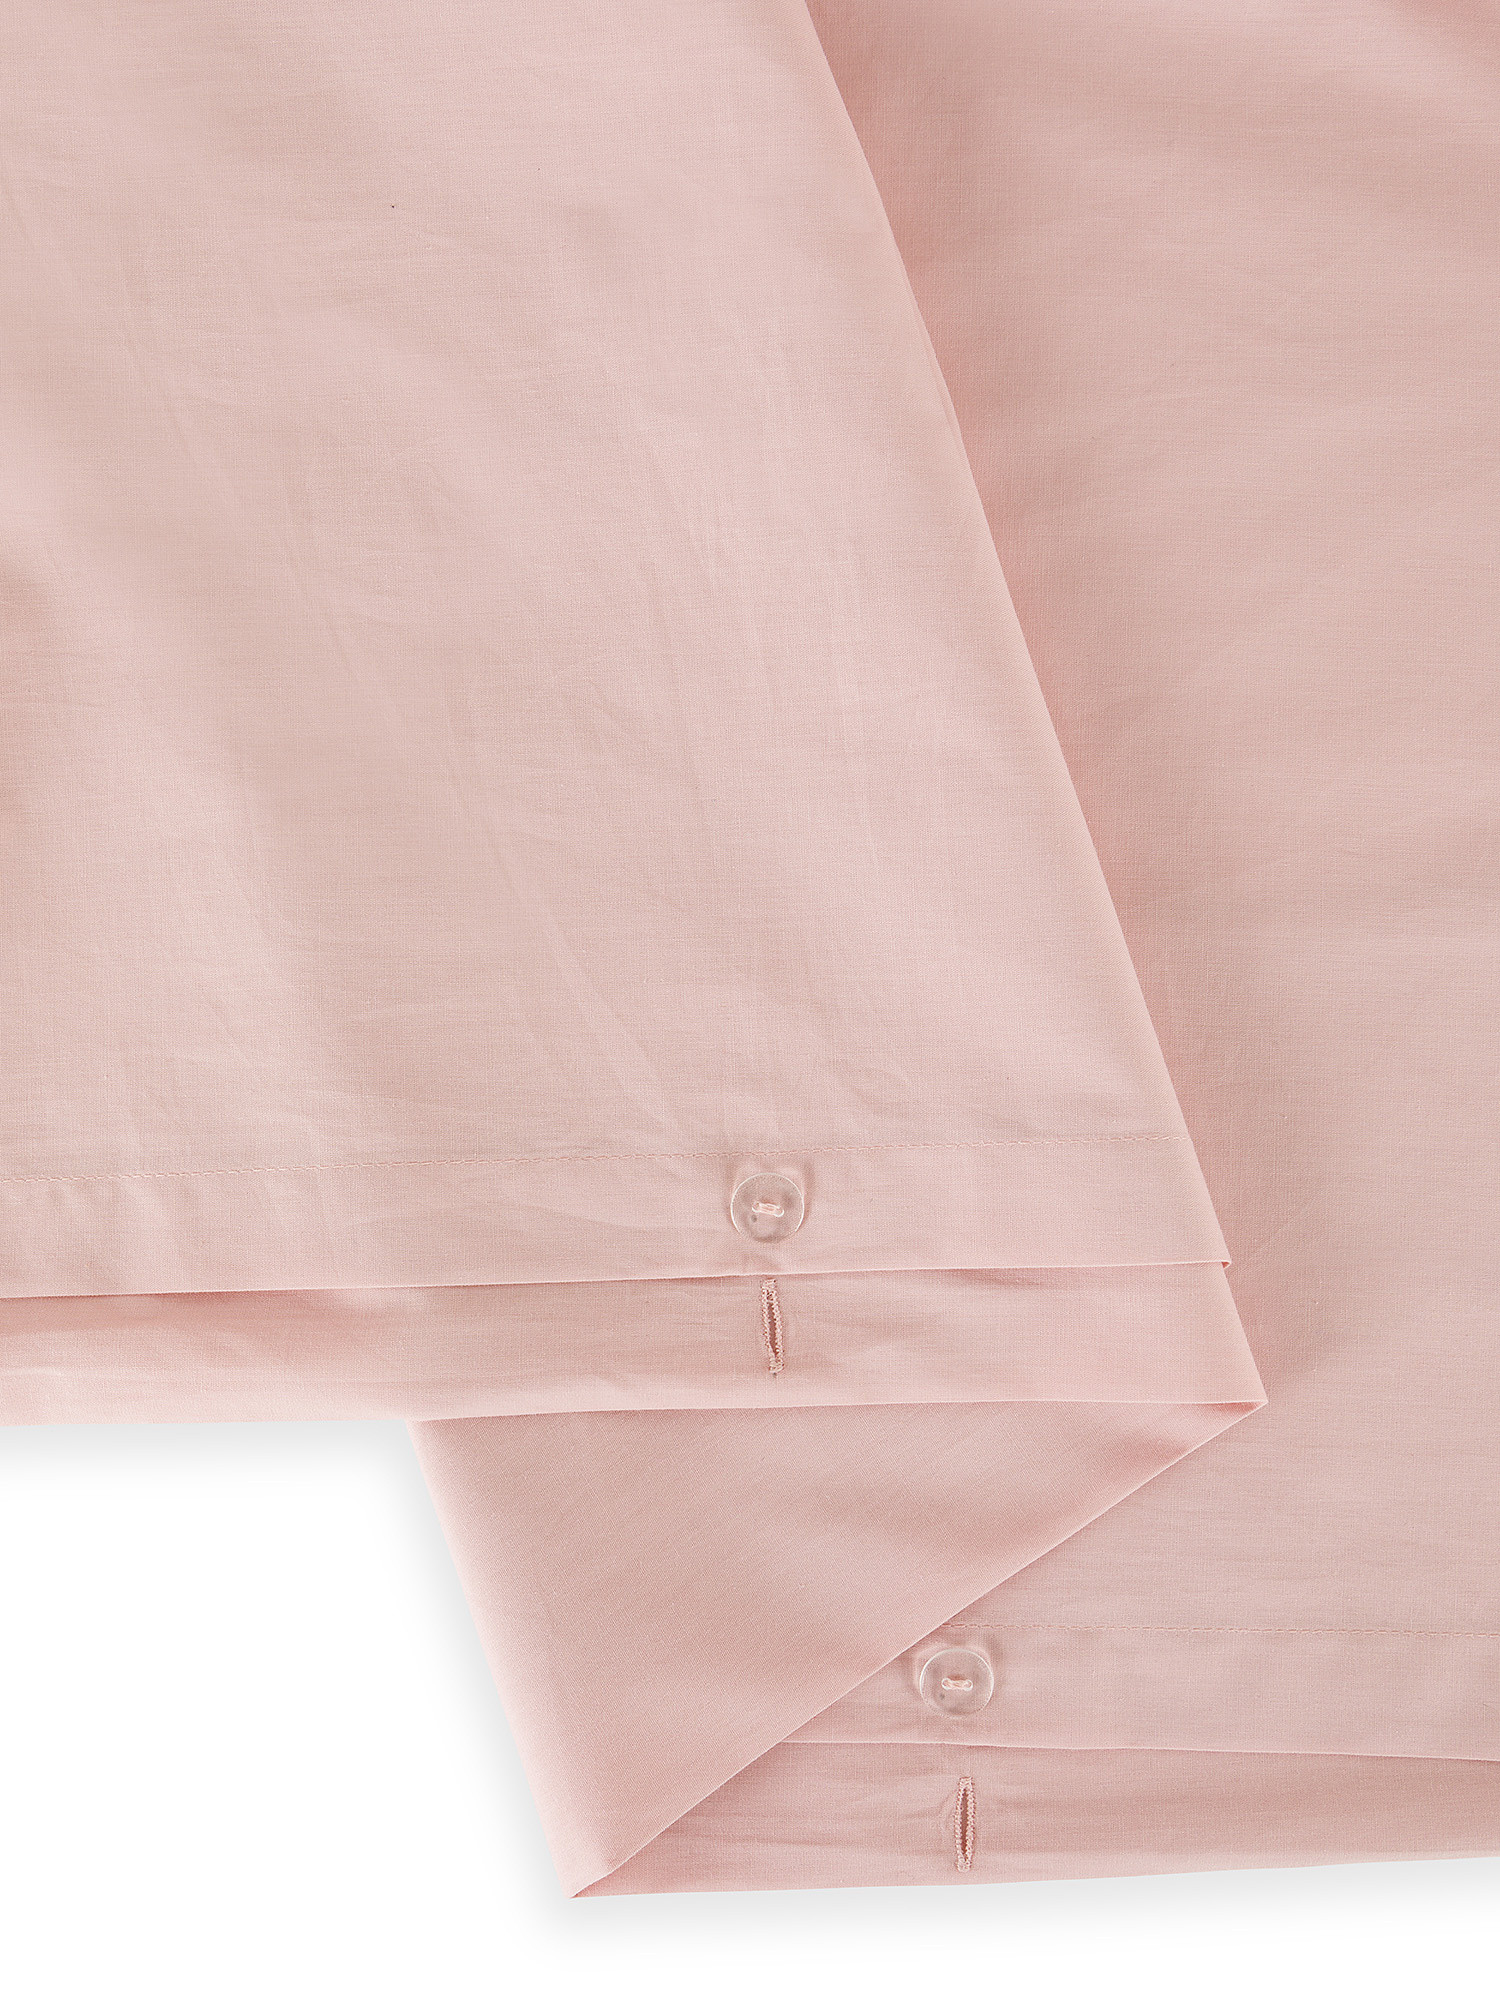 Solid color percale cotton duvet cover set, Pink, large image number 1